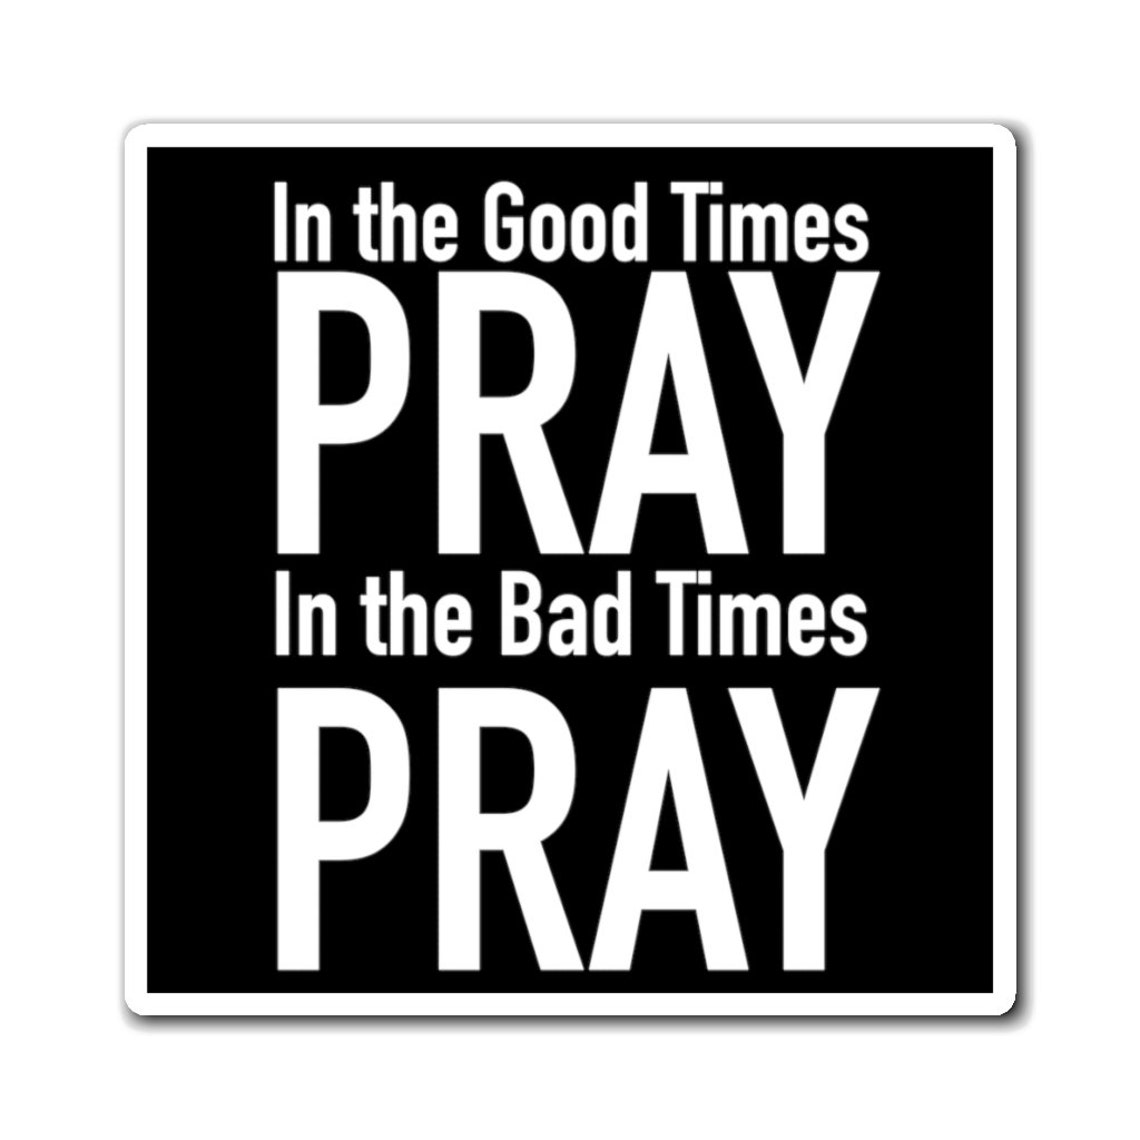 Pray In The Good Times And Bad Times Christian Prayer Magnets Etsy